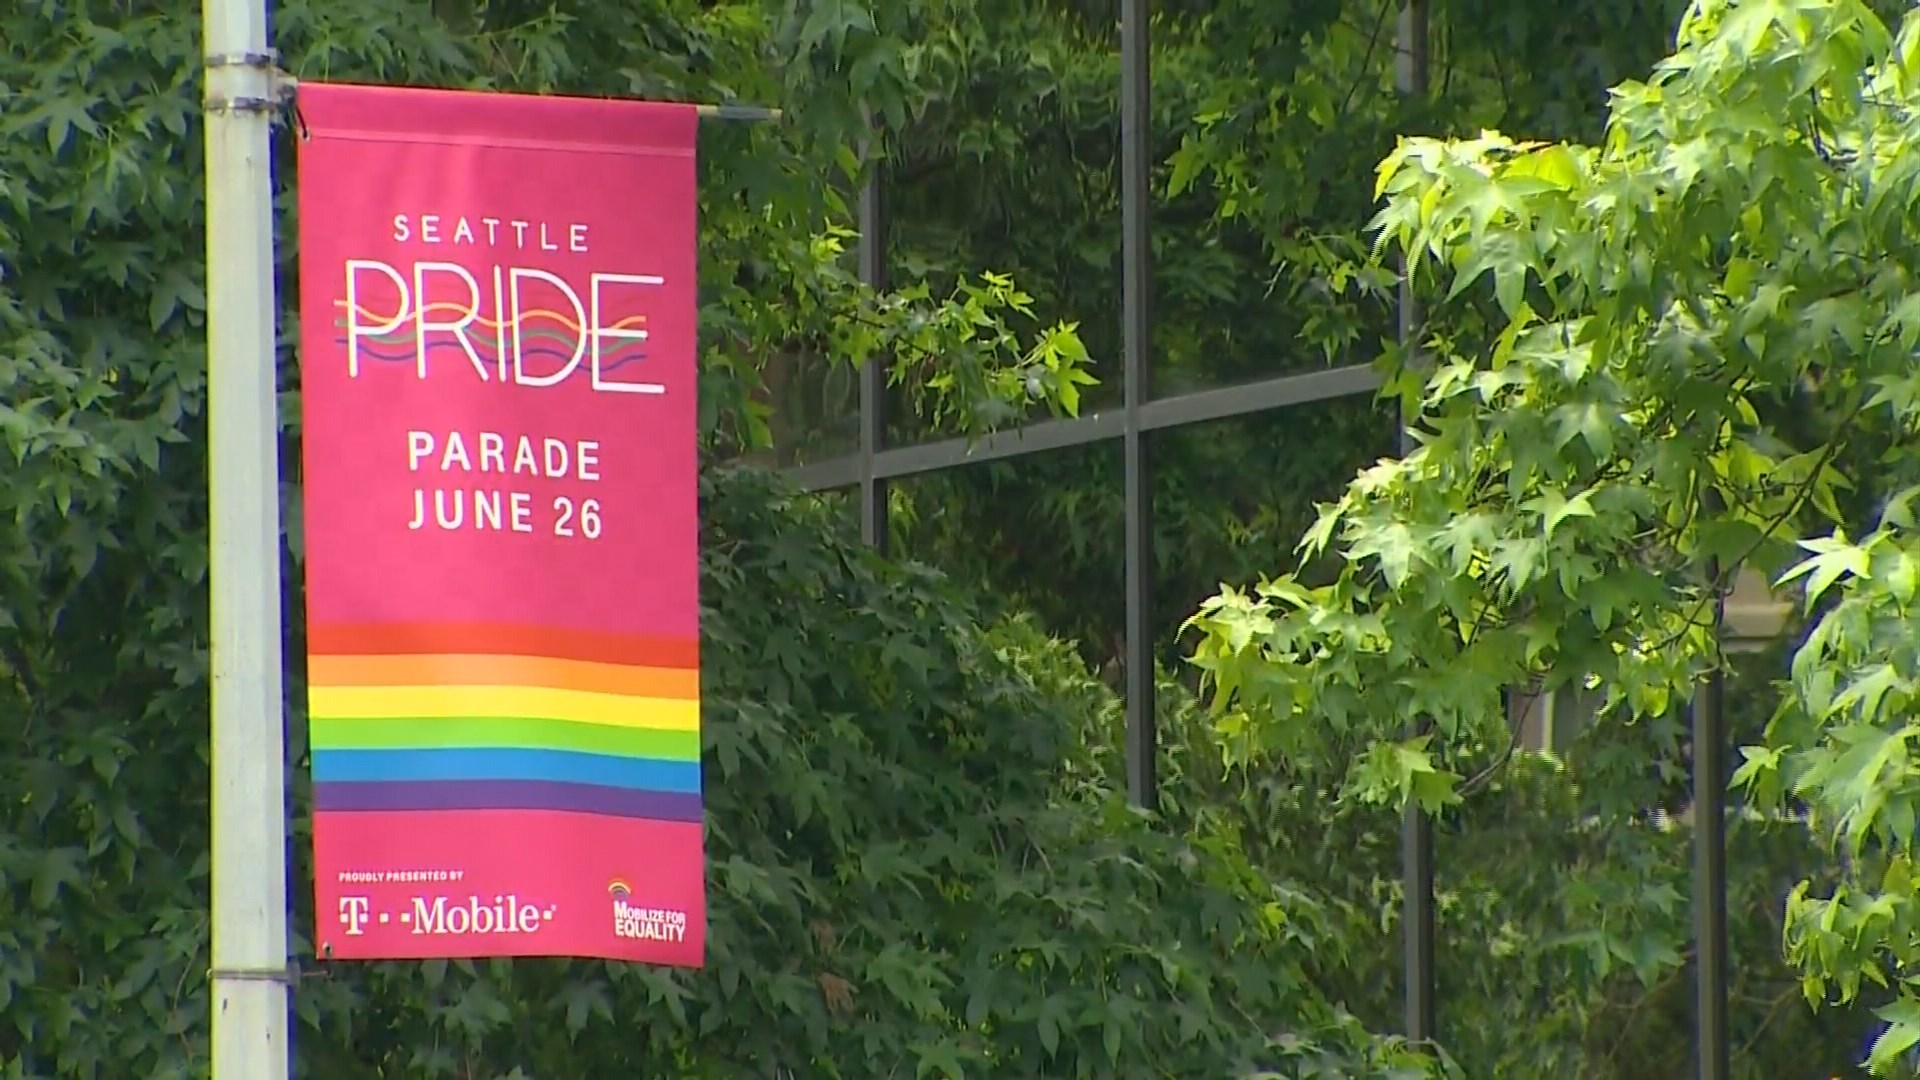 Seattle LGBT community continues Pride planning